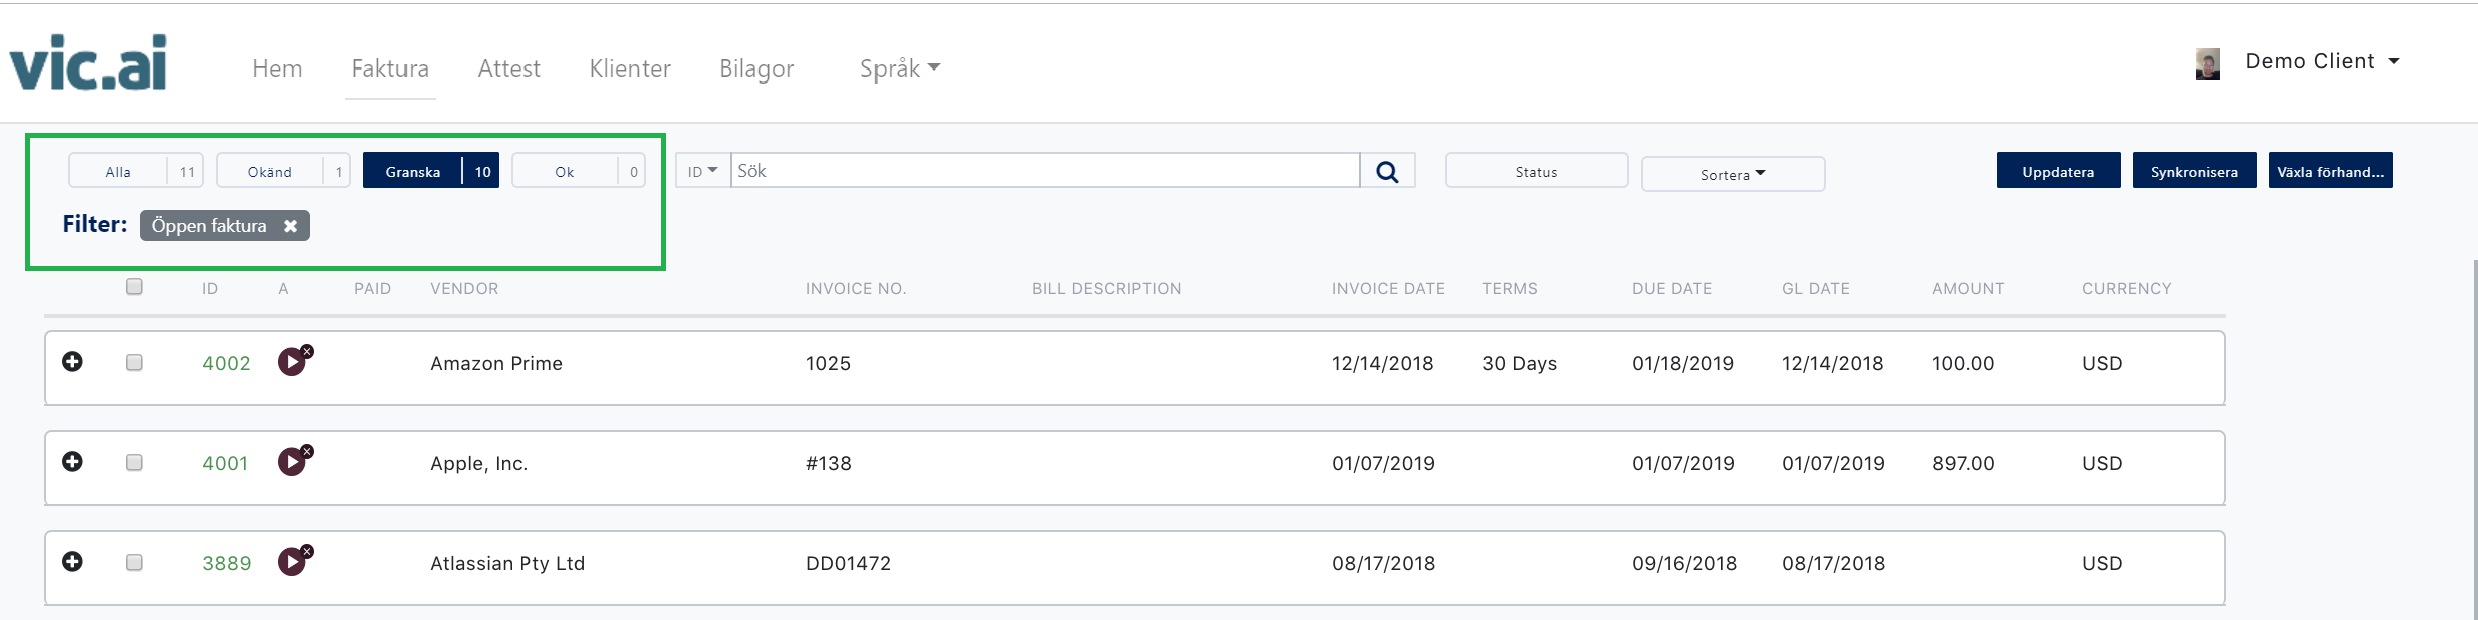 Vic_ai_Dashboard_Invoice_Overview_1.png